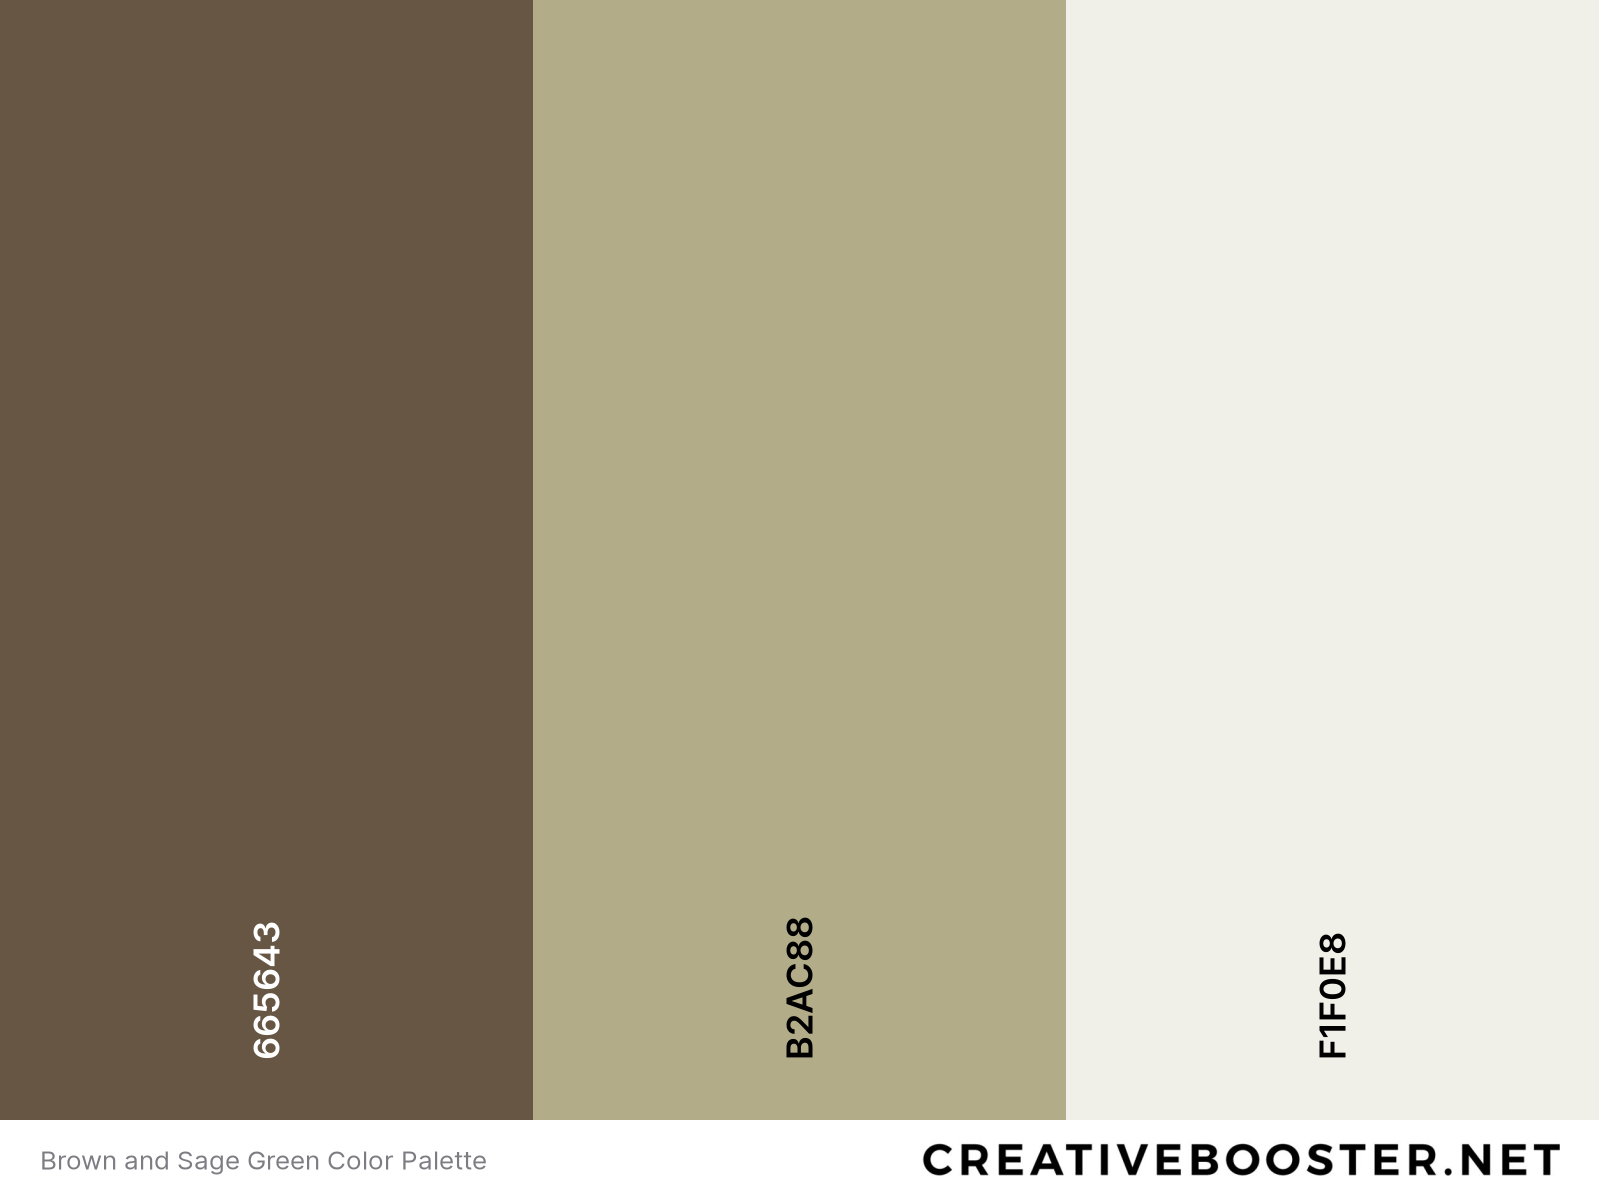 Brown and Sage Green Color Palette